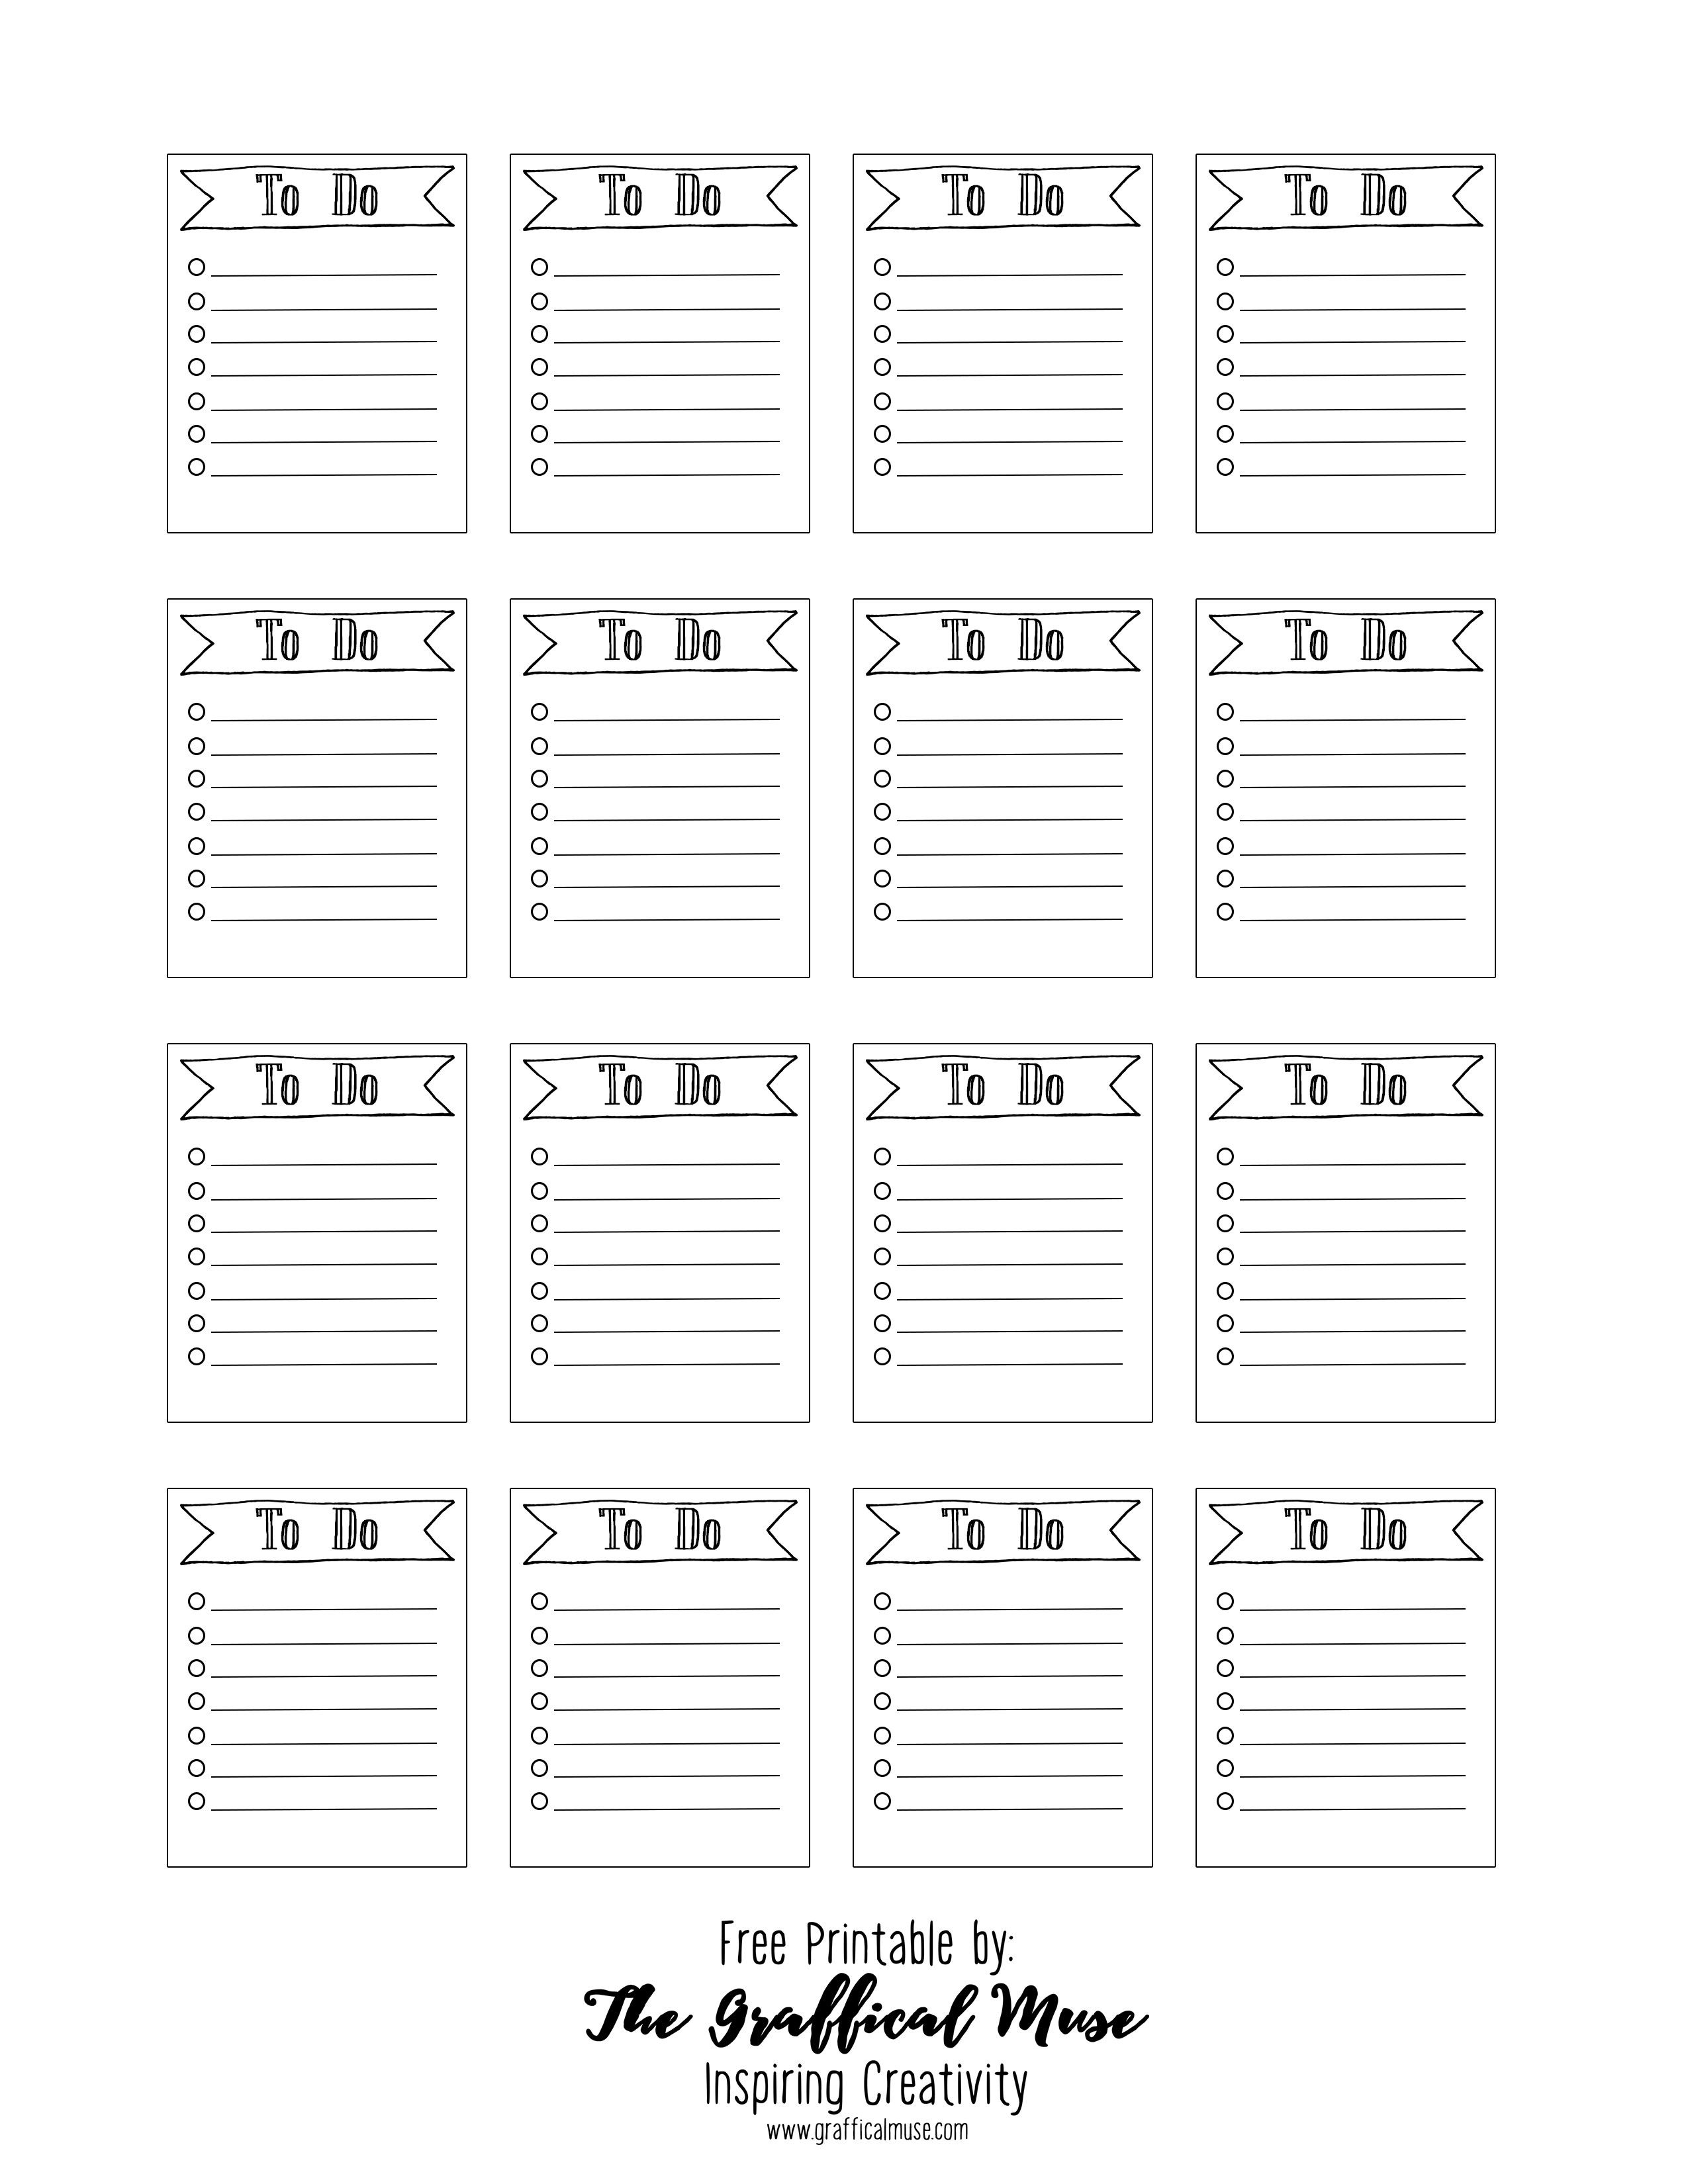 Free Printable Planner Stickers To Do List | My Style/crafting - Free Printable To Do List Planner